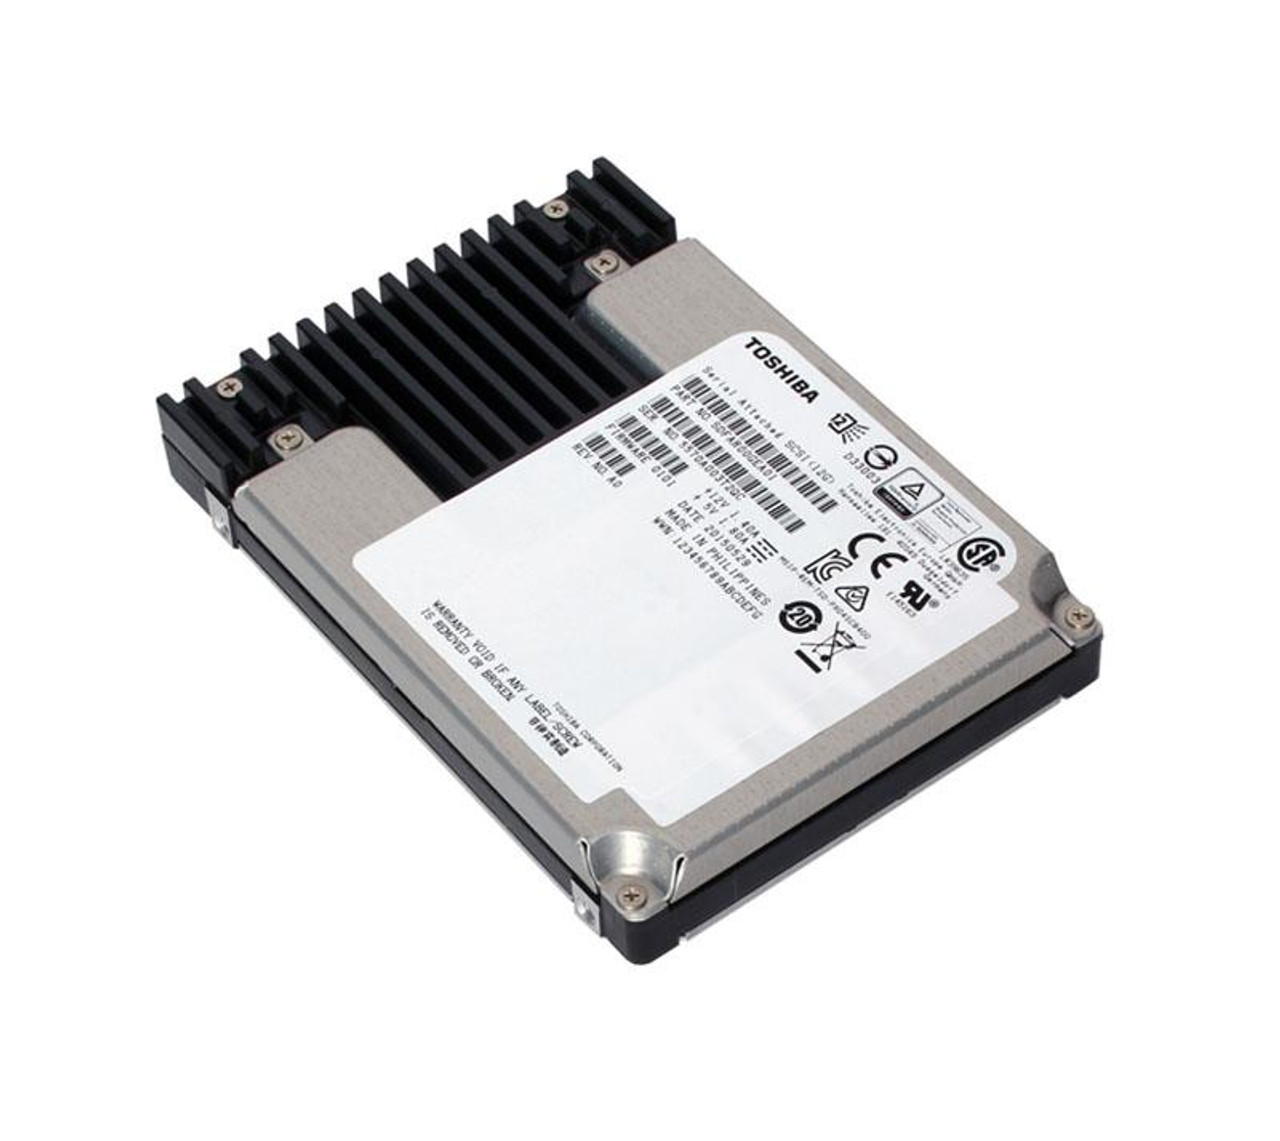 PX05SVQ096B Toshiba Enterprise 960GB MLC SAS 12Gbps Mixed Use (SED FIPS 140-2 / PLP) 2.5-inch Internal Solid State Drive (SSD)